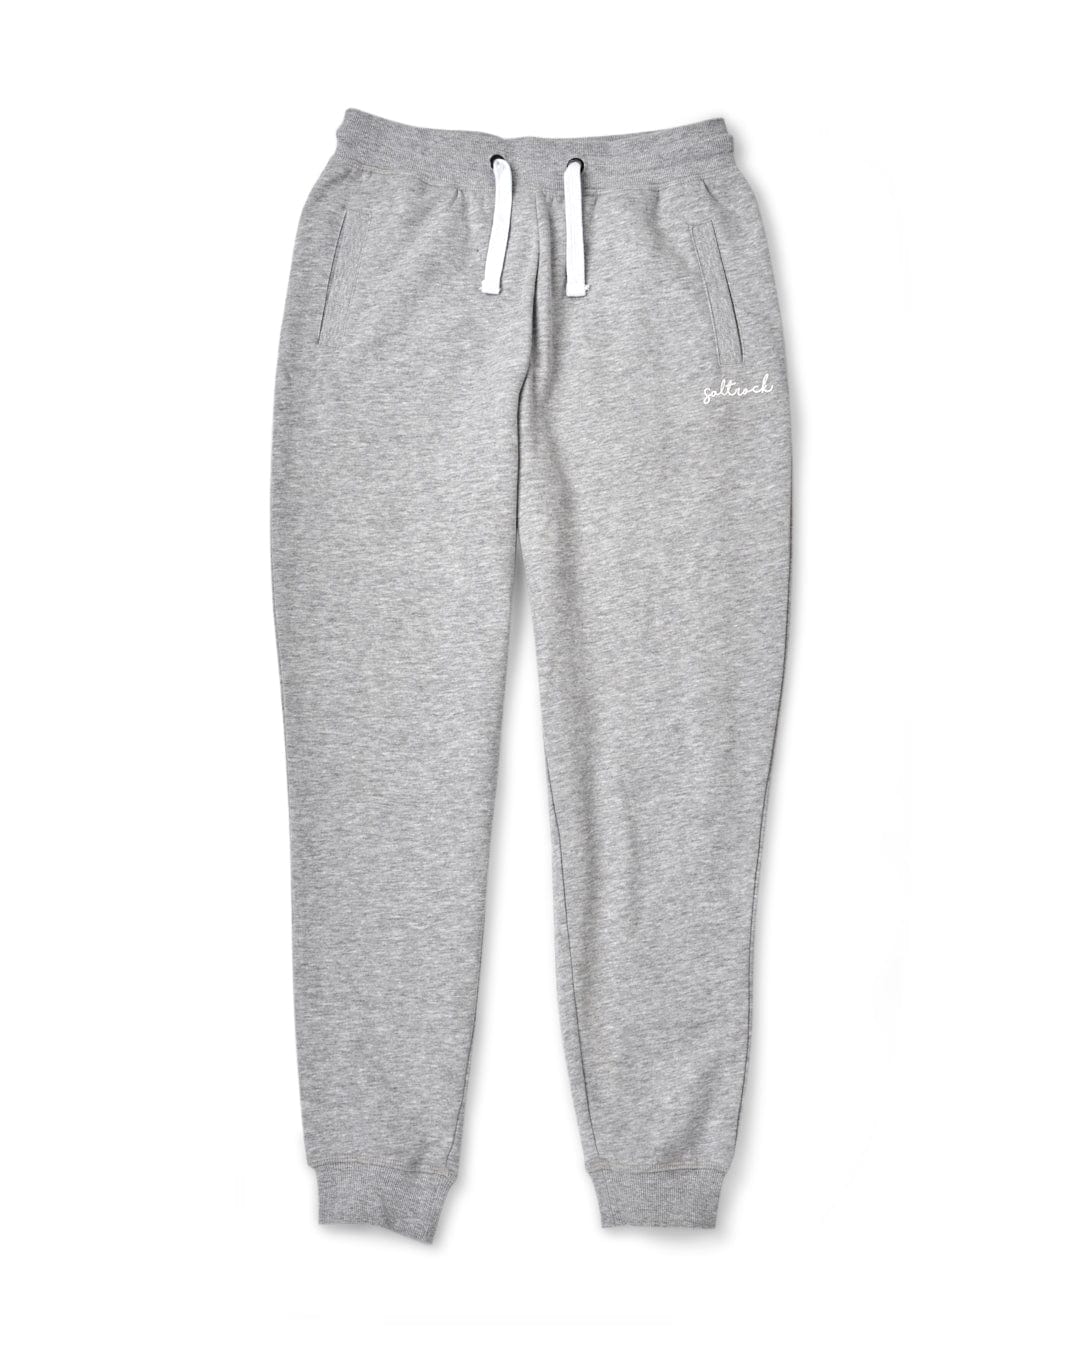 A pair of grey Velator - Womens Joggers with a white Saltrock logo.